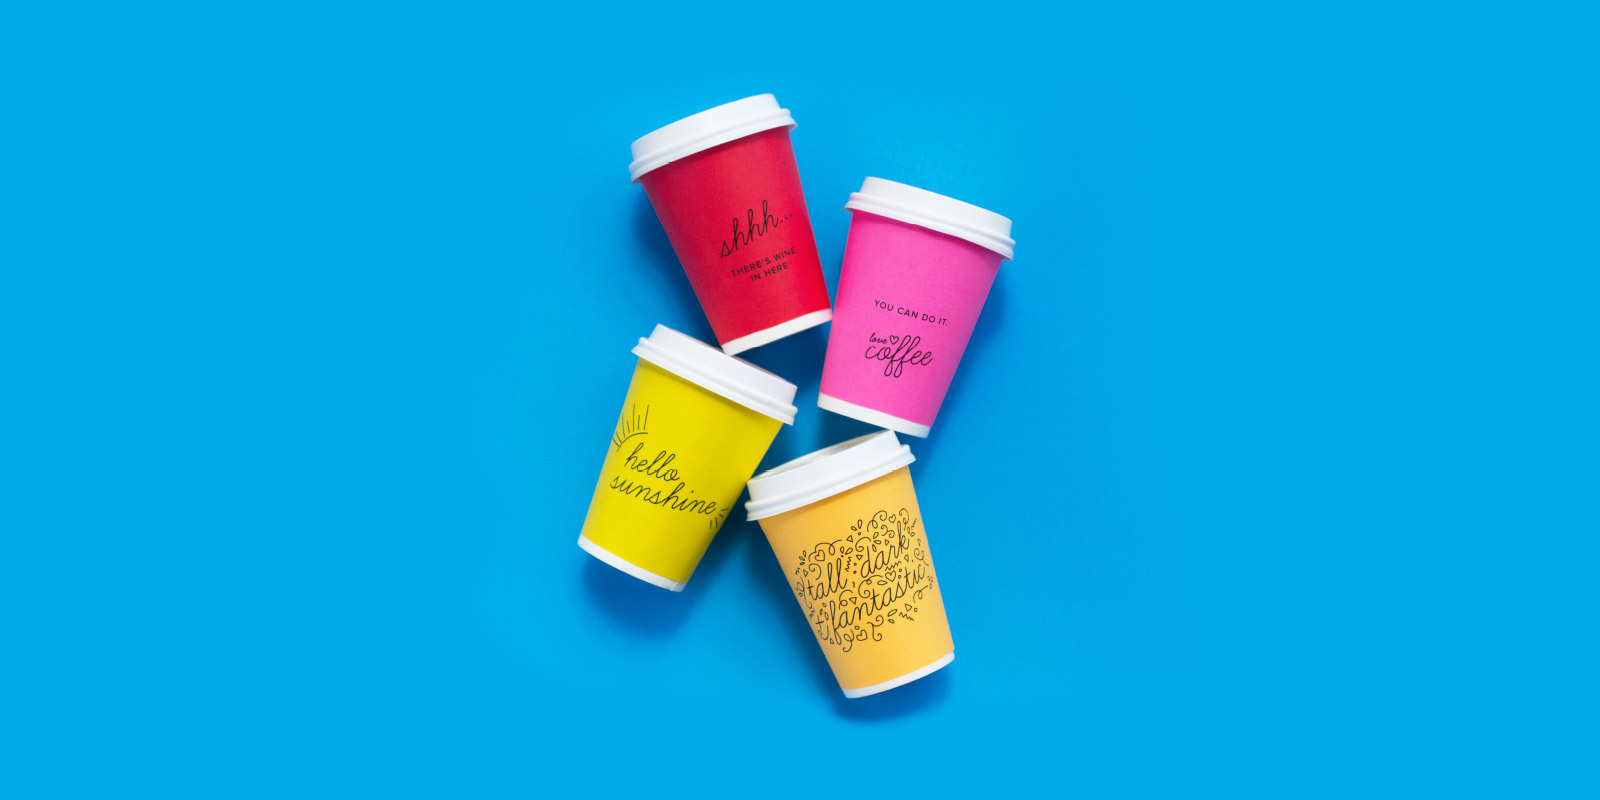 Free Printable Coffee Cup Wraps To Perk Up Your Morning Brew